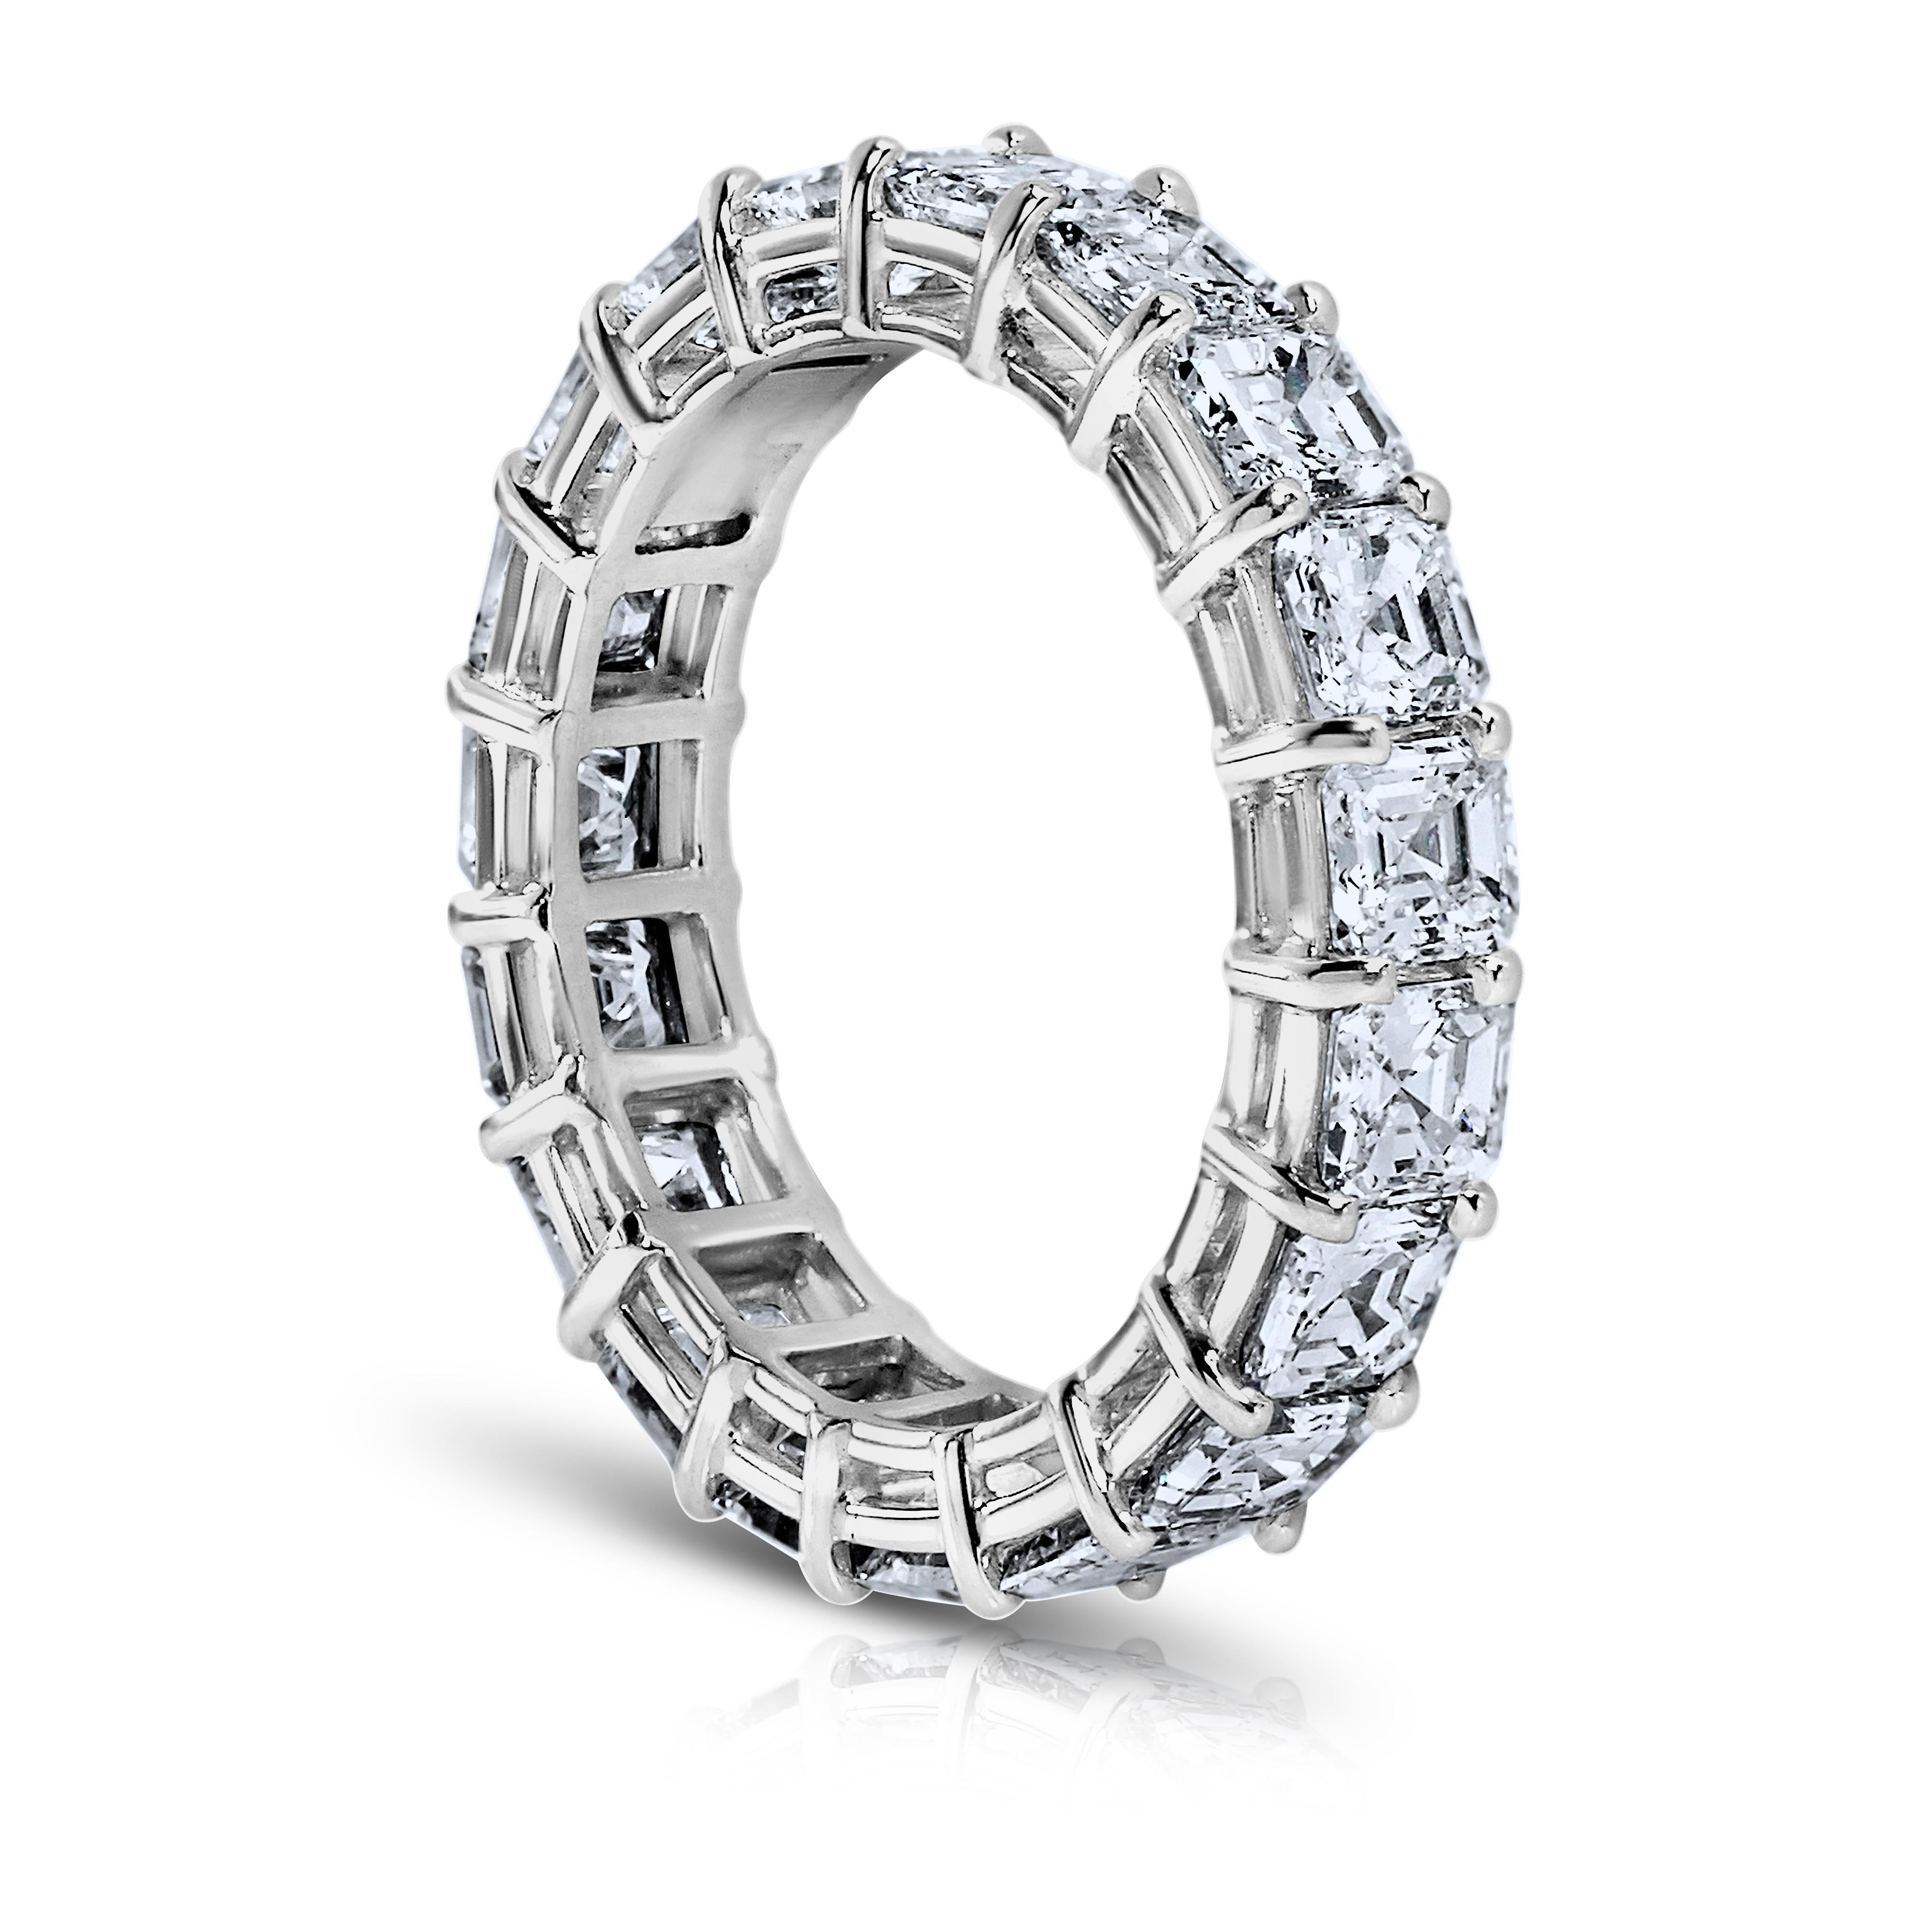 Asher Cut diamond ring platinum eternity band shared prong style with a gallery.
14 perfectly matched diamonds weighing a minimum of 7 cts. G.I.A certificates for each diamond . Ranging from D-F in color . VVS1-VS2 in clarity .Finger size 5. Other